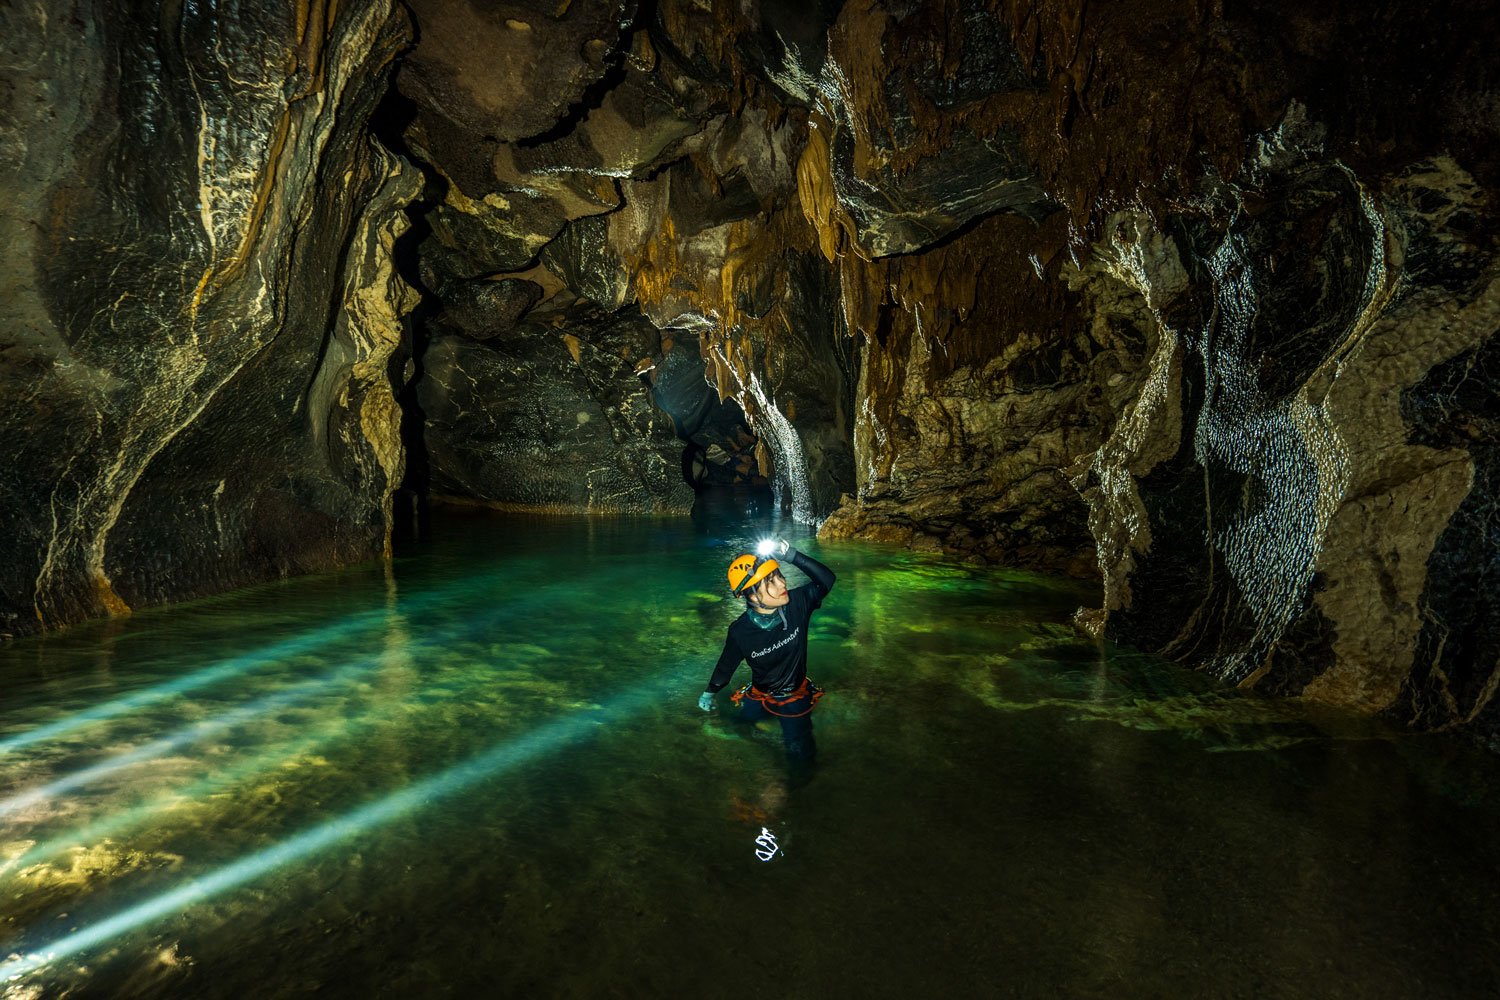 A beautiful emerald underground river inside Hang Va is very cool and refreshing, allowing guests to swim and cool off during the summer season.